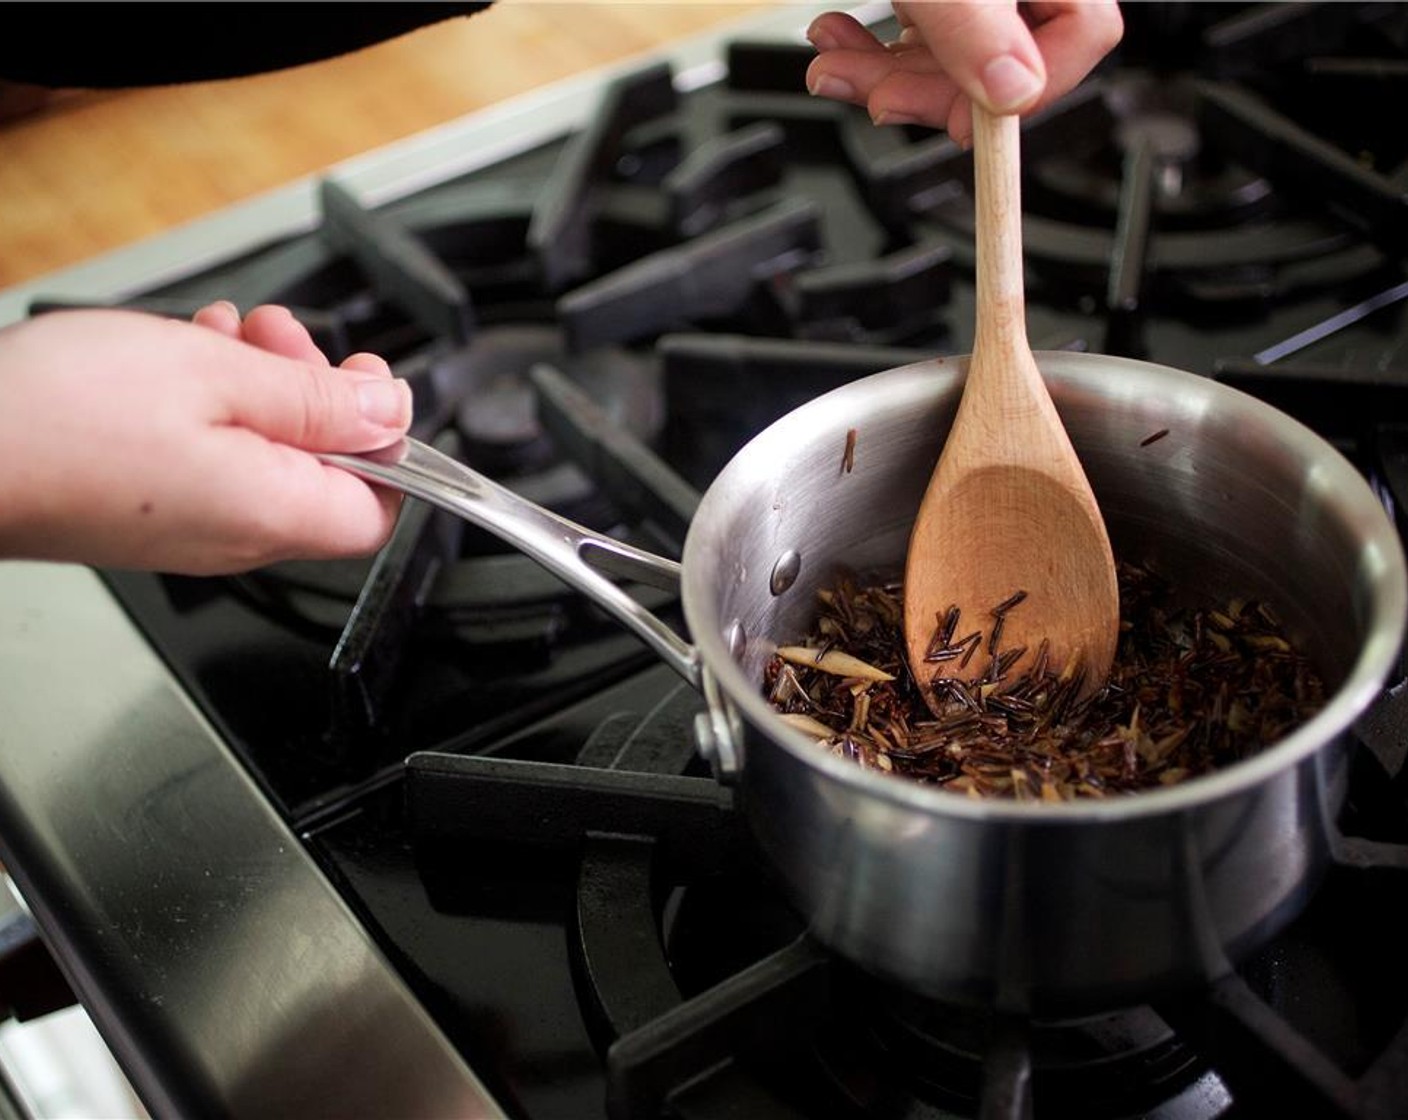 step 9 Strain the burdock root and add to the saucepan along with one and three quarters cup of water and Chicken Base (2 pckg). Stir, bring to a boil and cover, reduce the heat to low and let steam for fifty minutes. Remove from heat and drain. Return to pot, and keep warm.